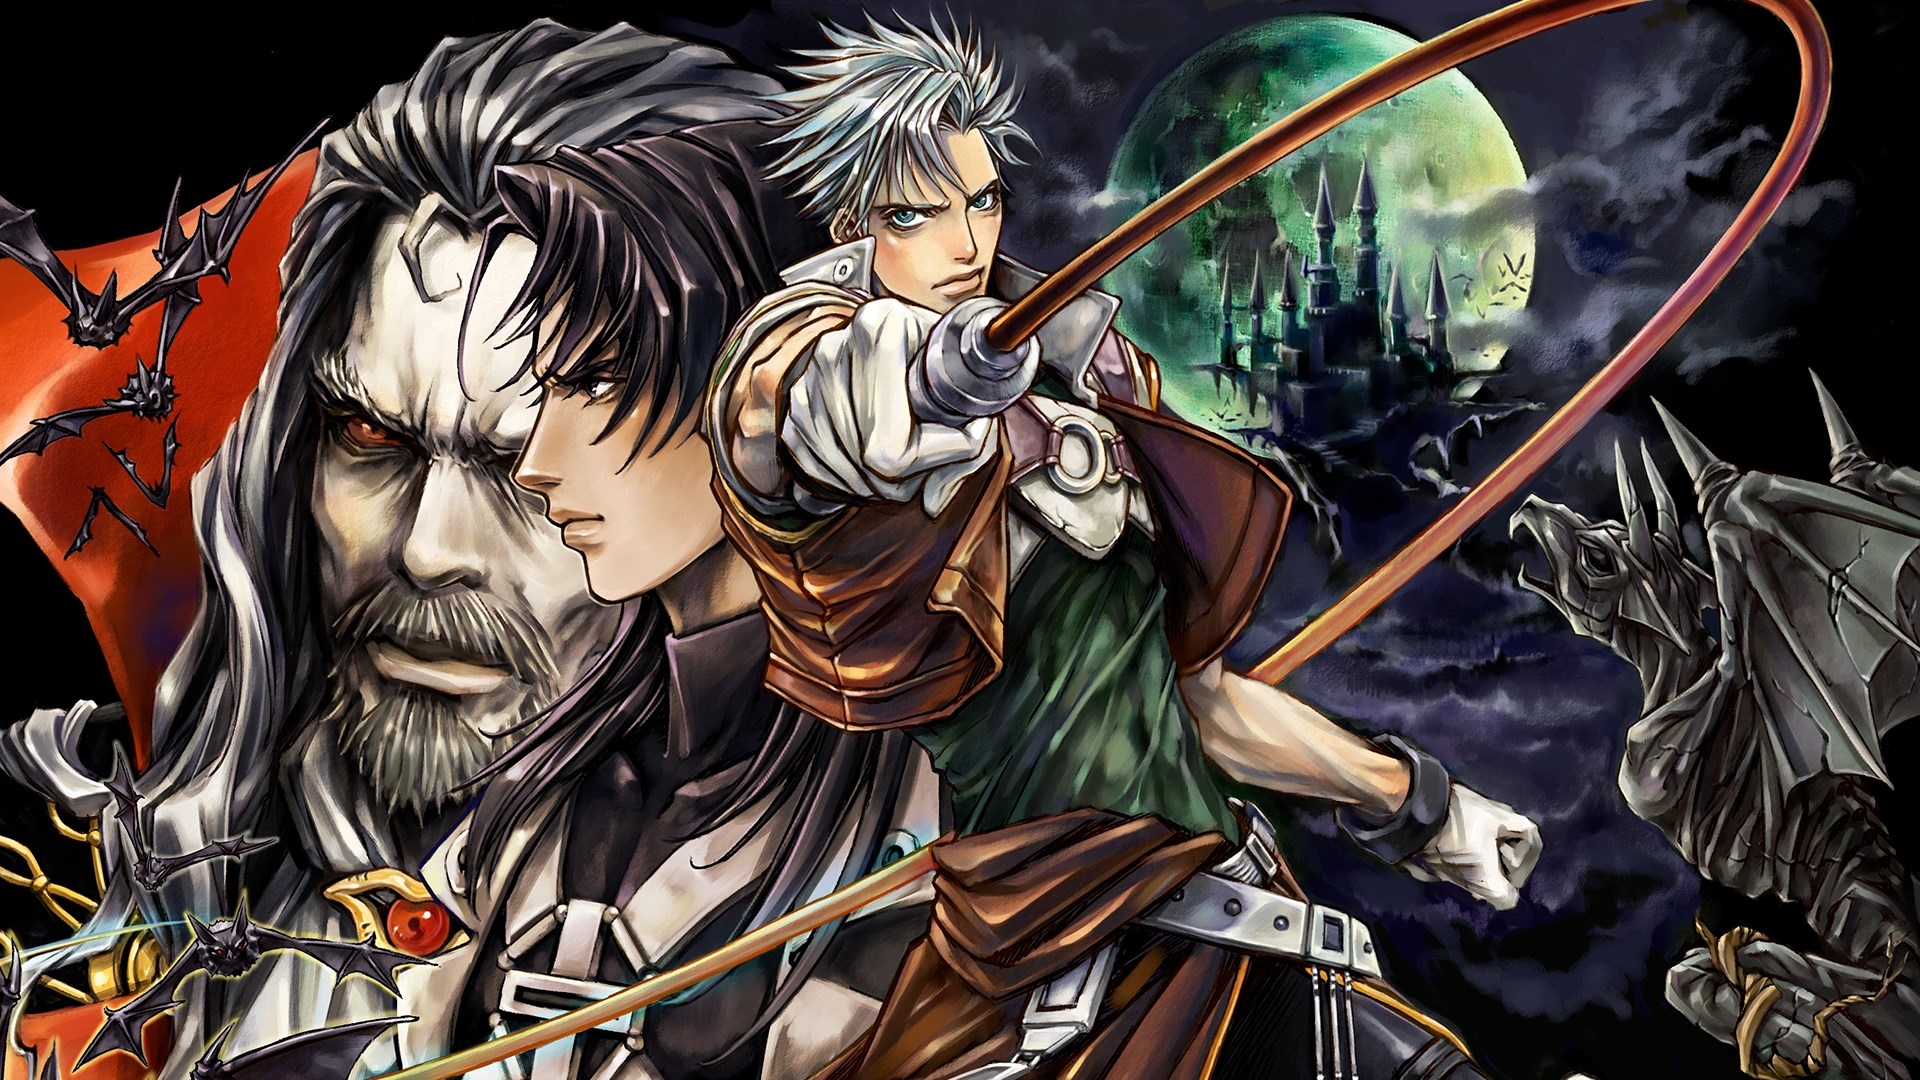 20 Anime Castlevania HD Wallpapers and Backgrounds